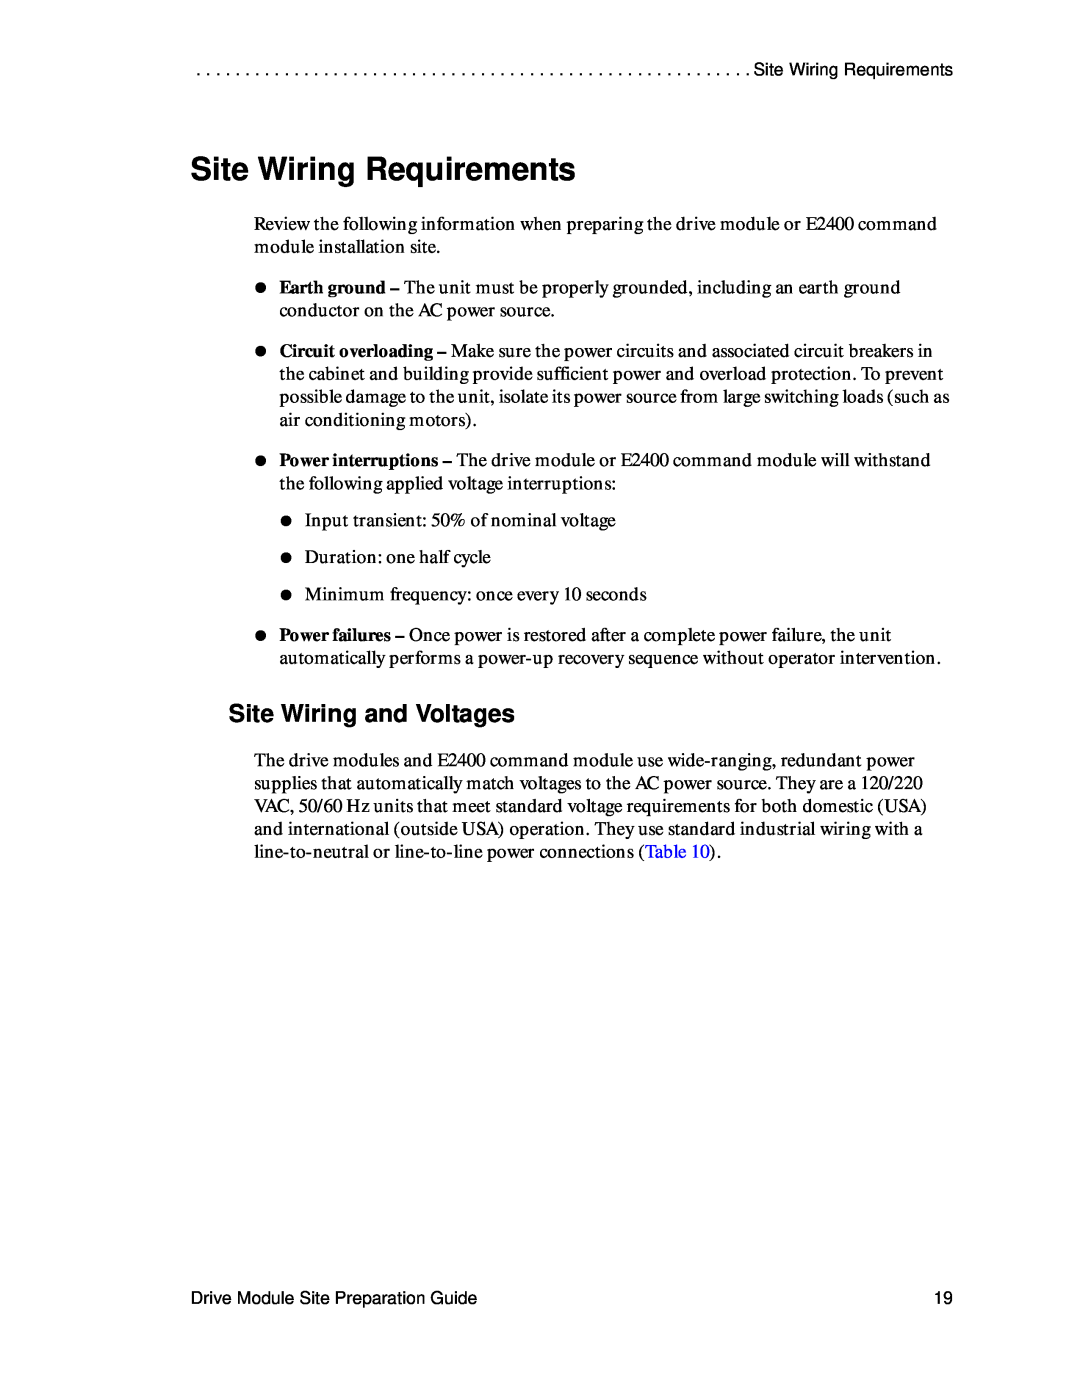 LSI DF1153-E1 manual Site Wiring Requirements, Site Wiring and Voltages 